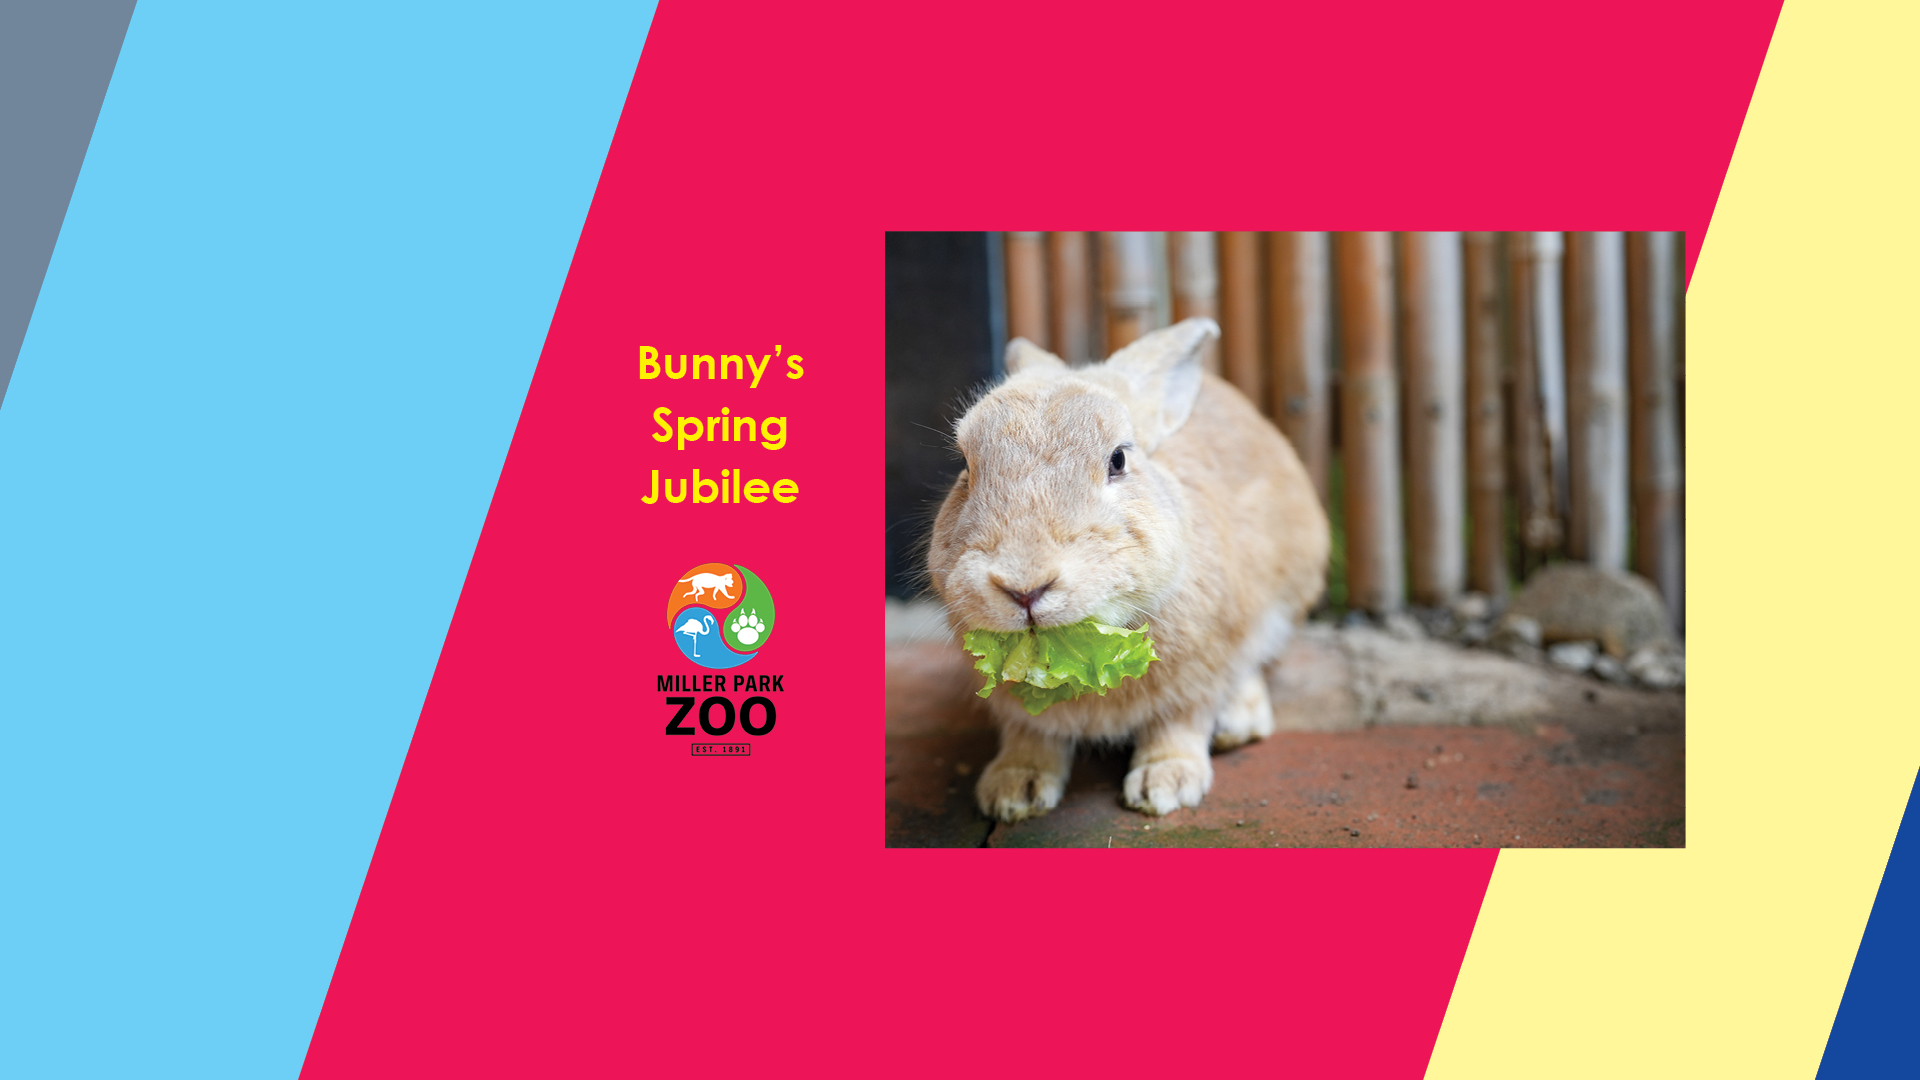 Bunny's Spring Jubilee at the Zoo